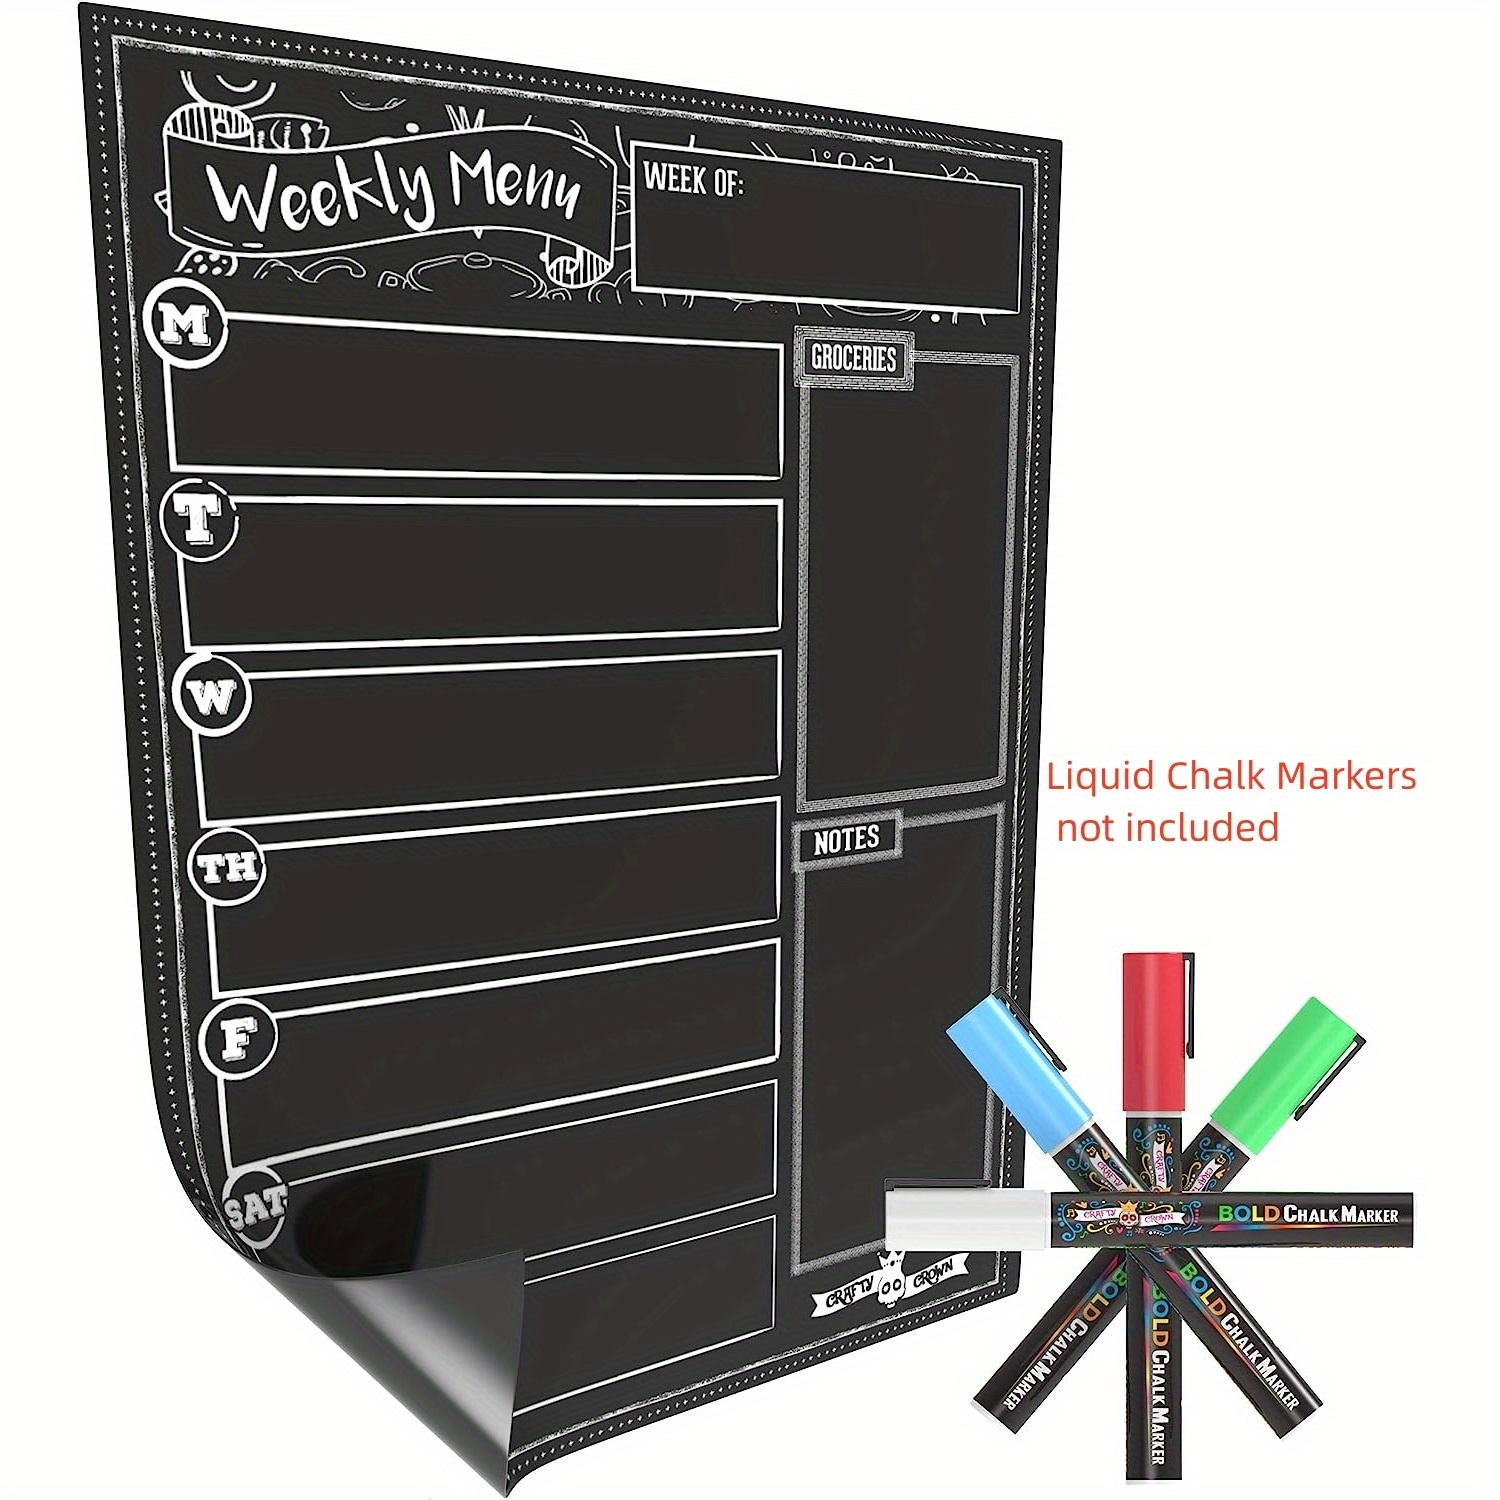 magnetic dry erase blackboard with chalkboard design for kitchen  fridge-office - includes 4 liquid chalk markers - 17x13 - refrigerator  black board organizer and planner 